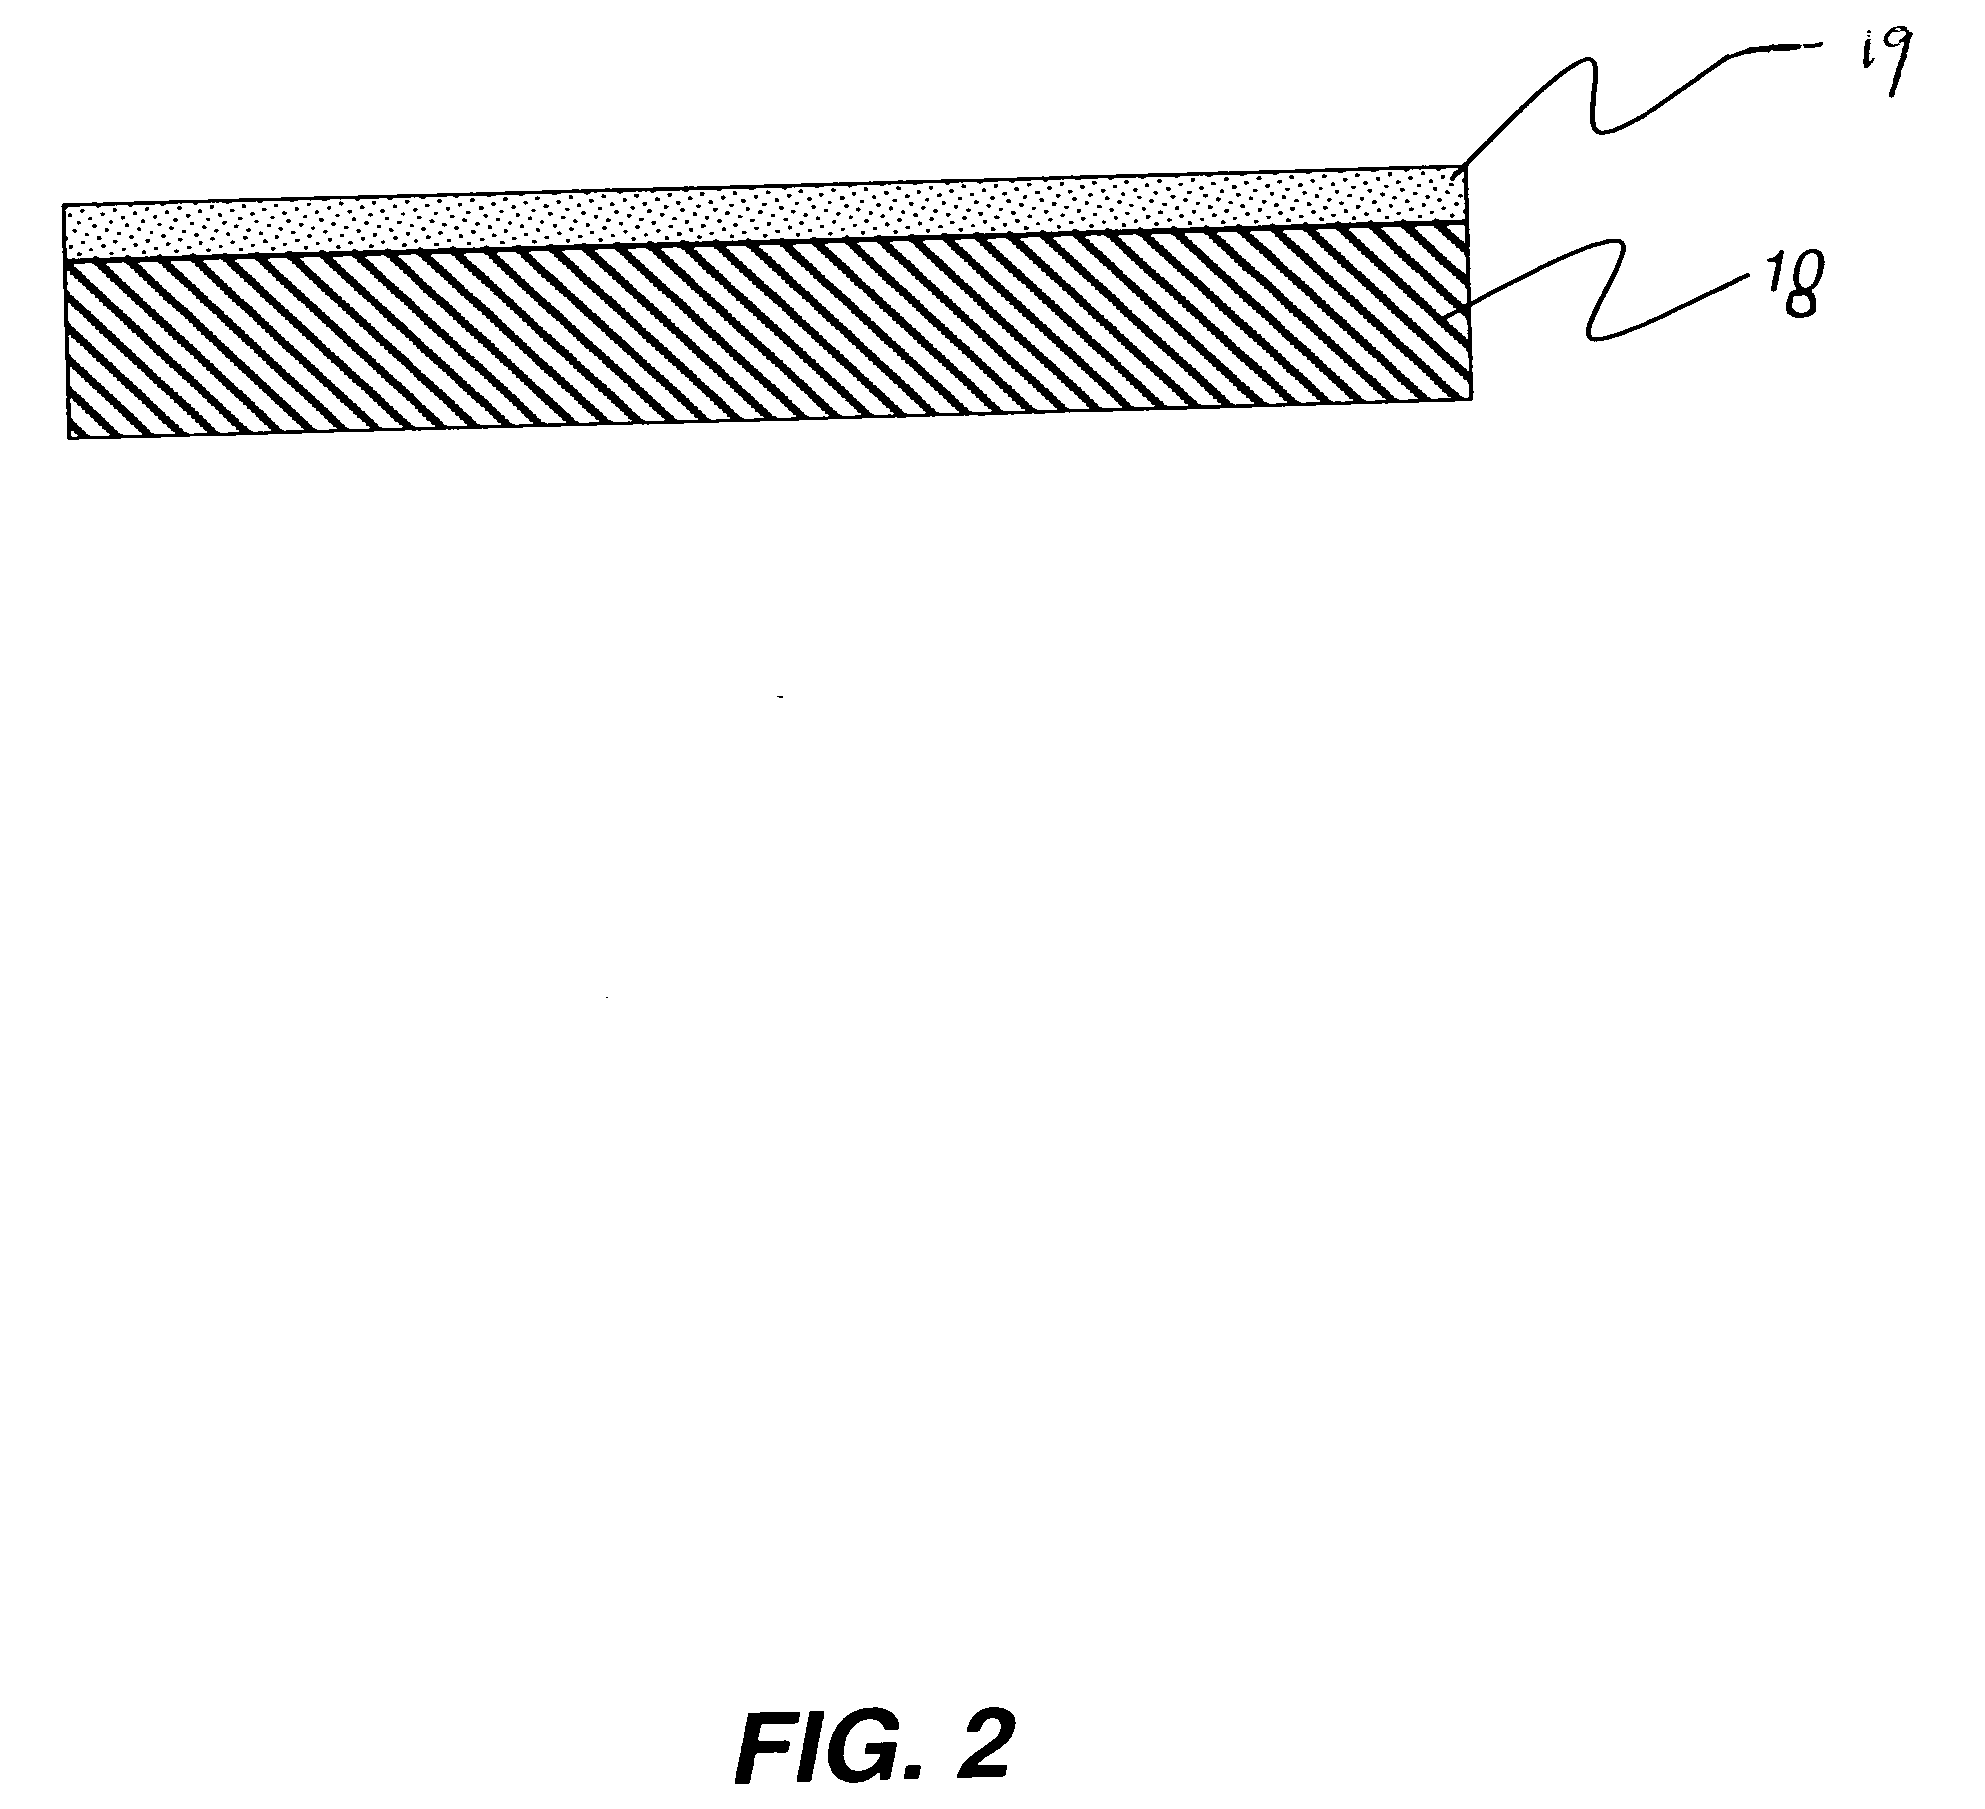 Forming electrical conductors on a substrate